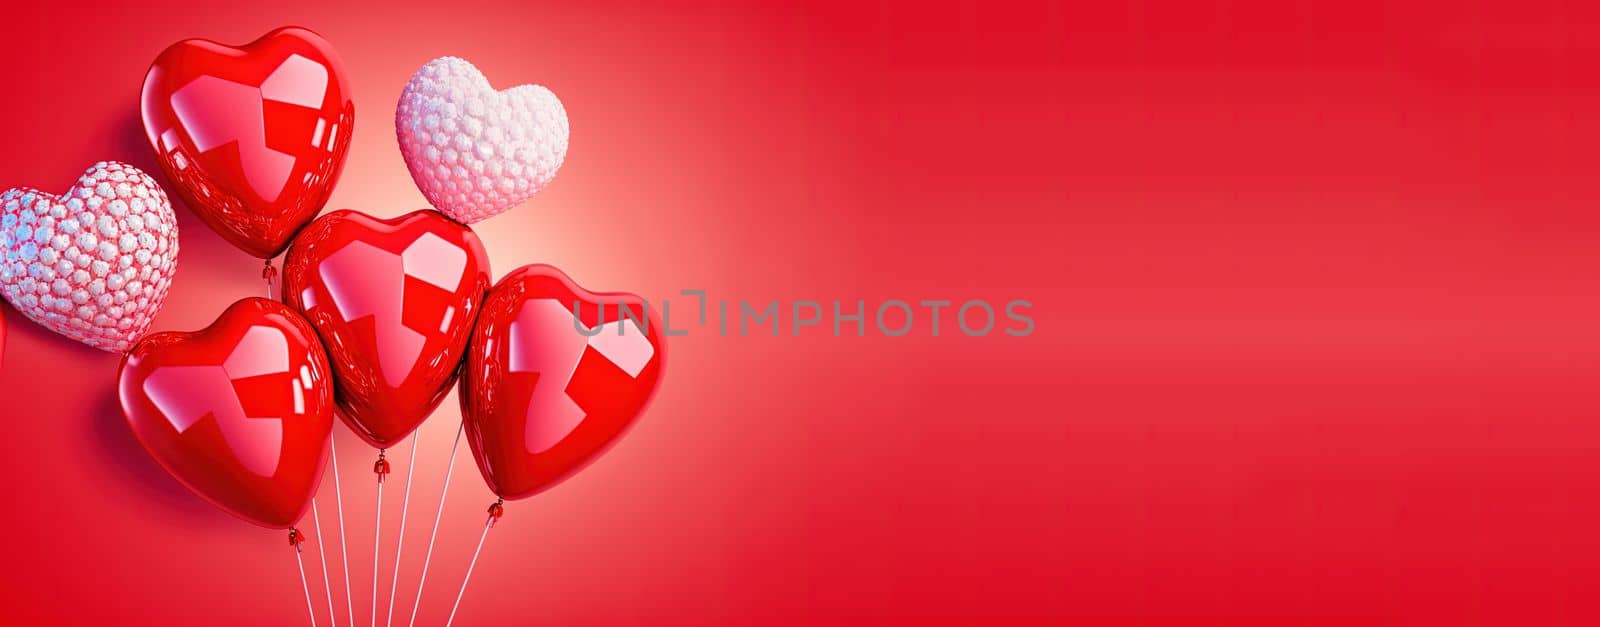 Valentine's Day banner background with a shining red 3D heart by templator